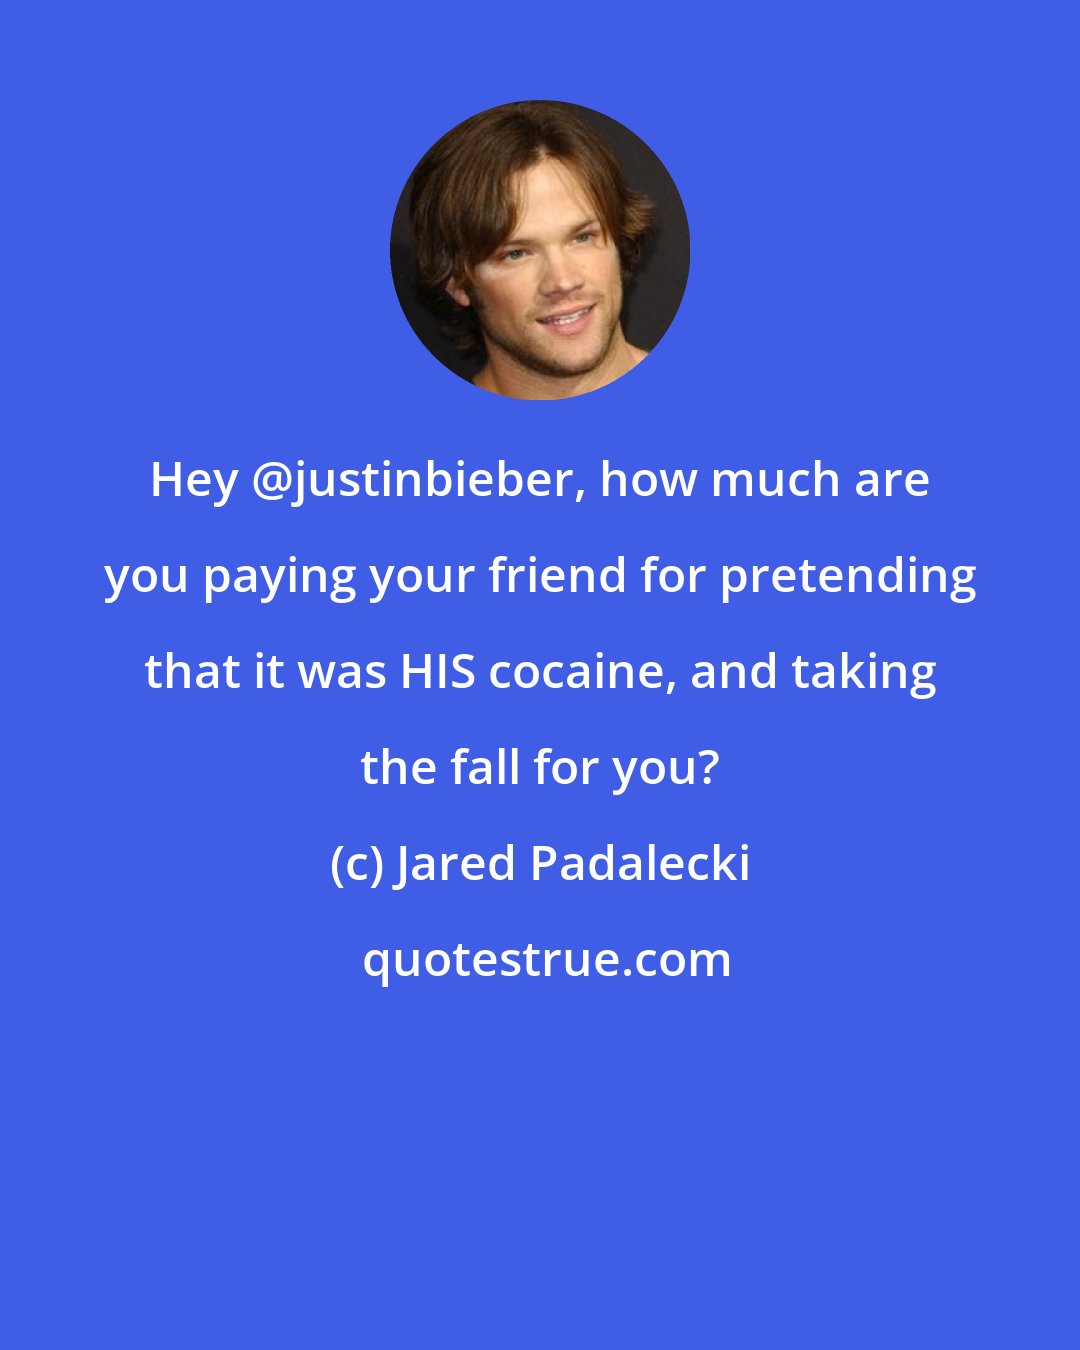 Jared Padalecki: Hey @justinbieber, how much are you paying your friend for pretending that it was HIS cocaine, and taking the fall for you?